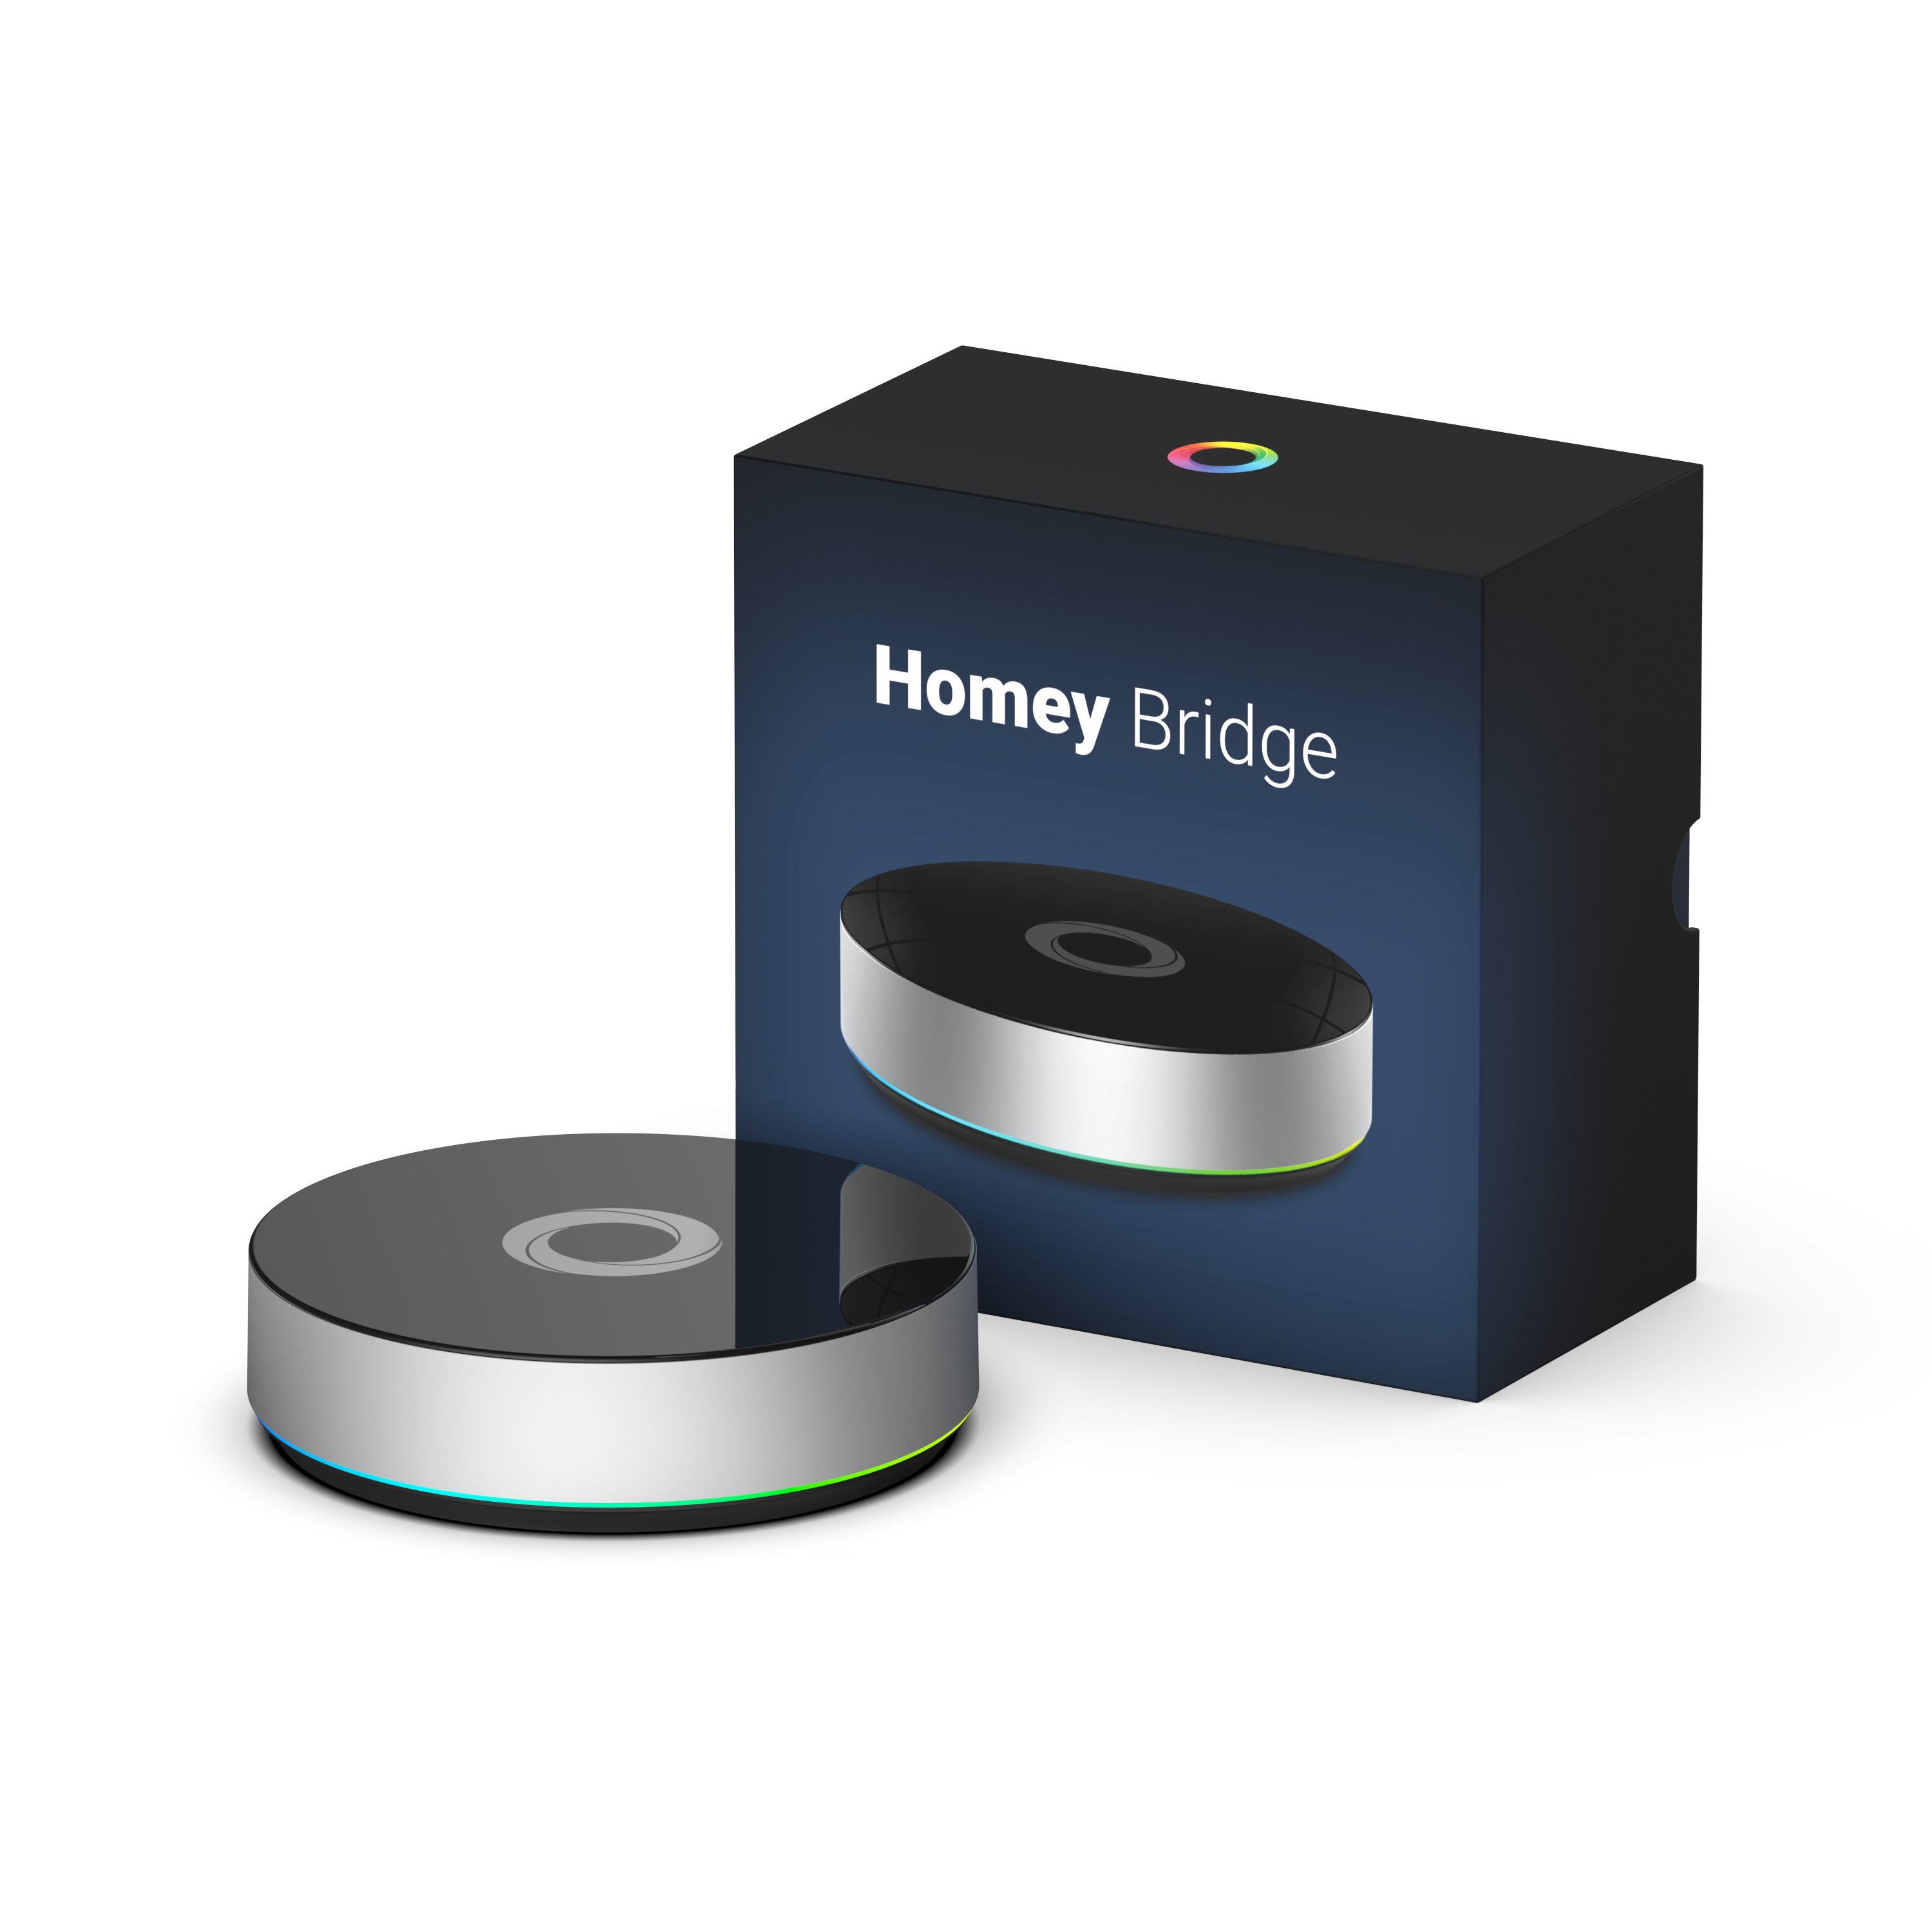 Homey CES 2022 Coverage, Homey Bridge And Automation